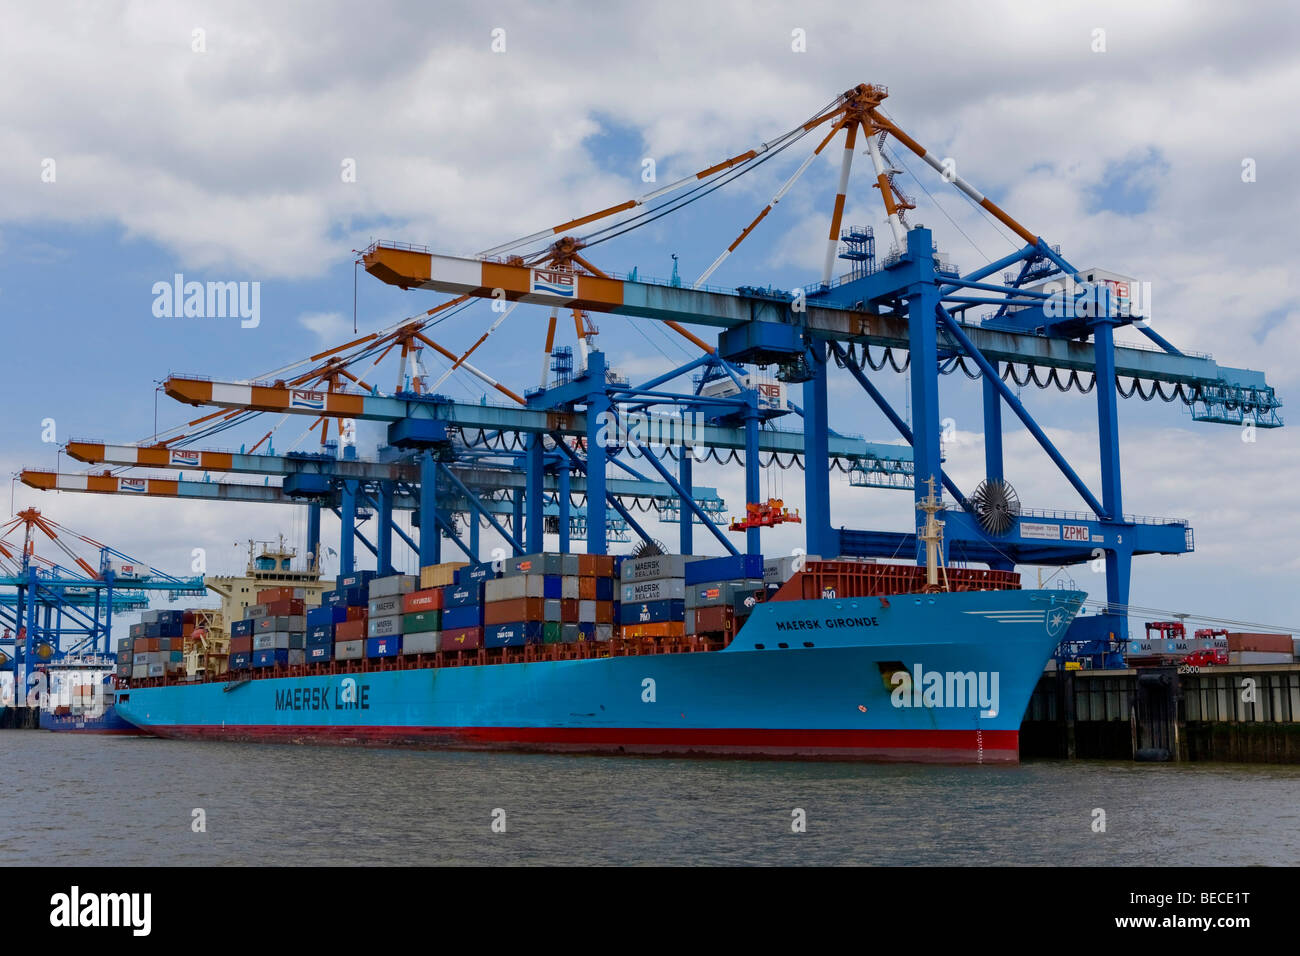 Container ship Maersk Gironde at the container terminal in Bremerhaven, Germany Stock Photo